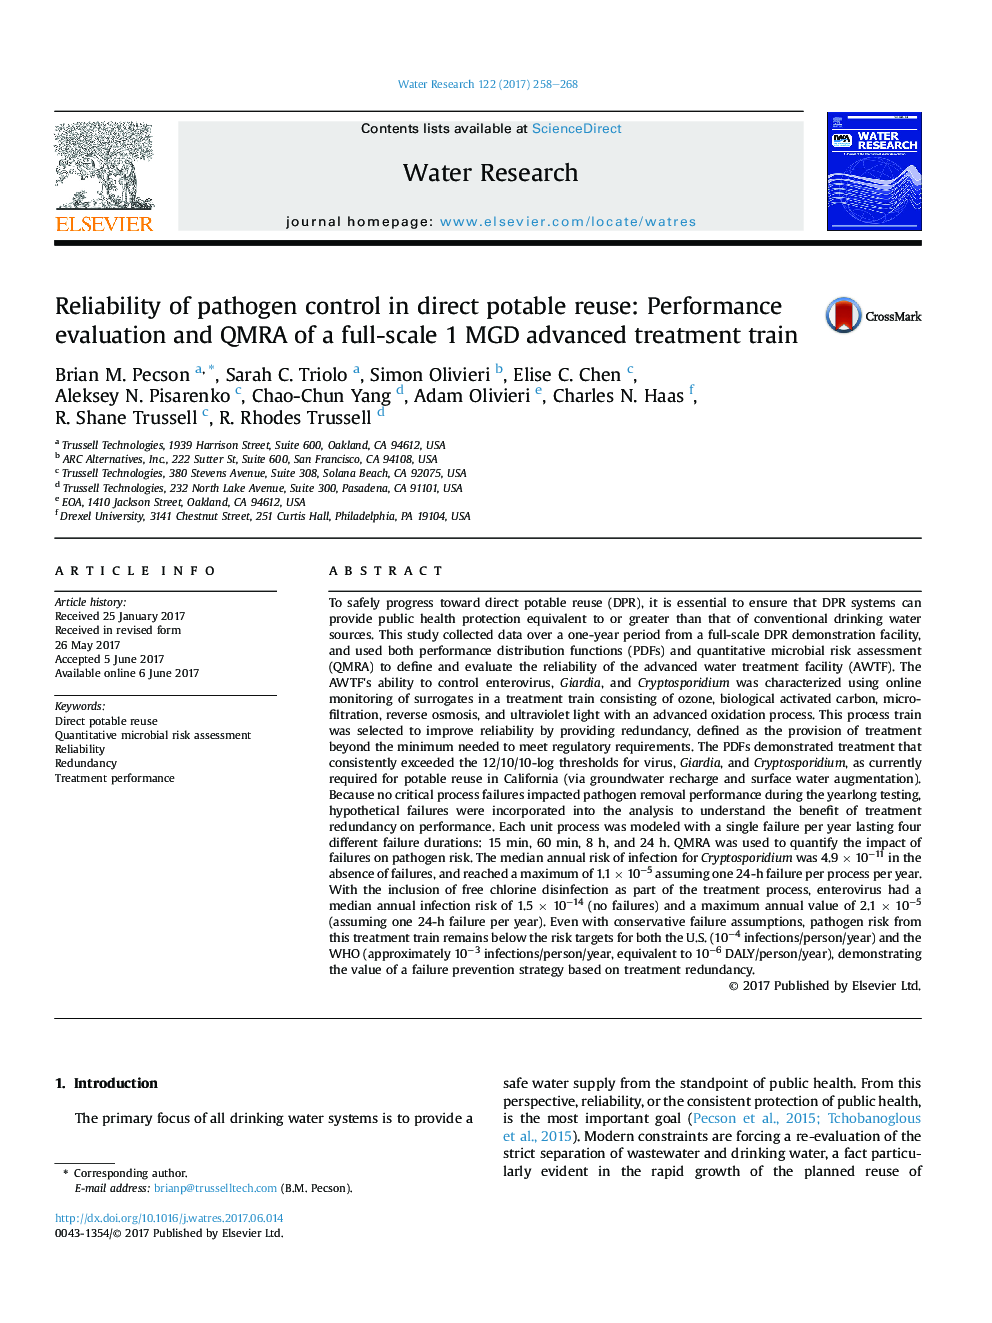 Reliability of pathogen control in direct potable reuse: Performance evaluation and QMRA of a full-scale 1 MGD advanced treatment train